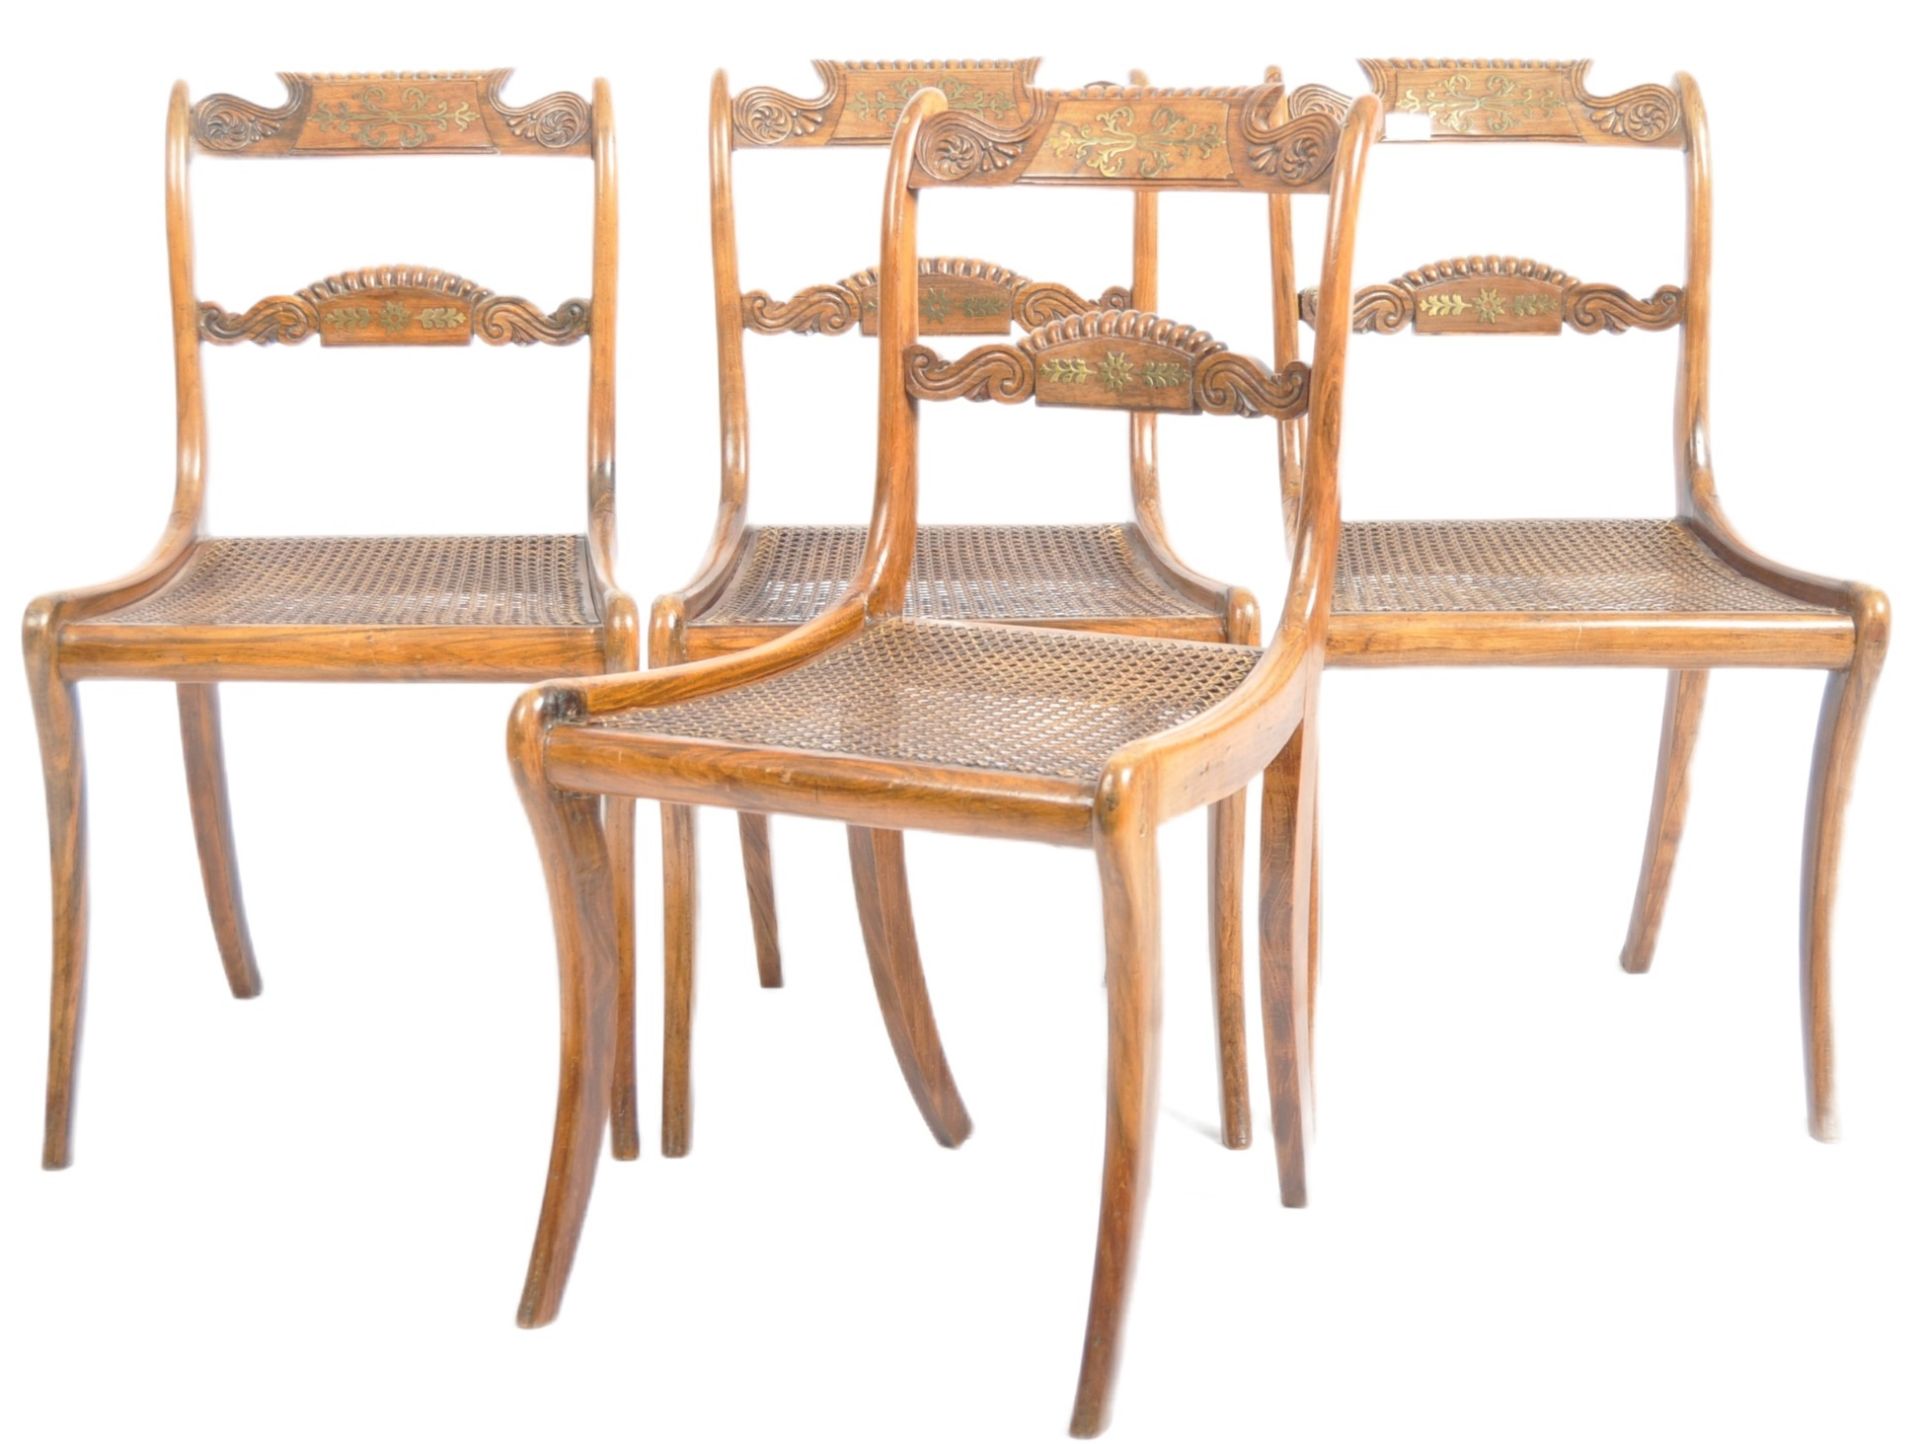 FOUR 19TH CENTURY REGENCY ROSEWOOD DINING CHAIRS